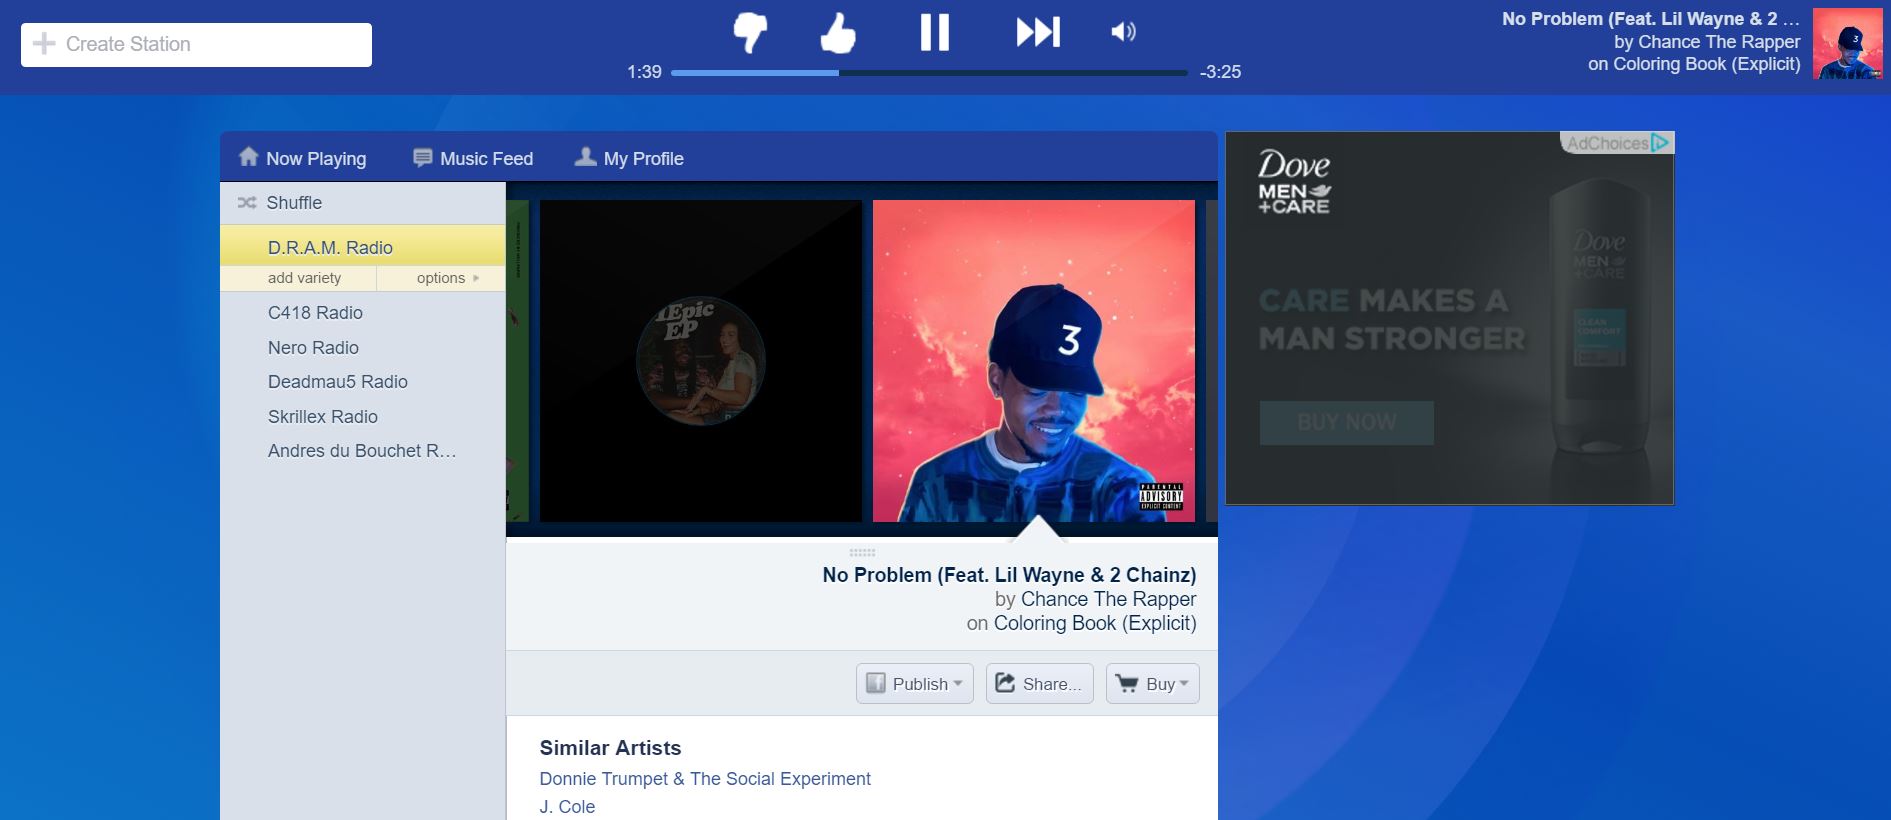 Pandora's Now Playing screen before today's redesign.